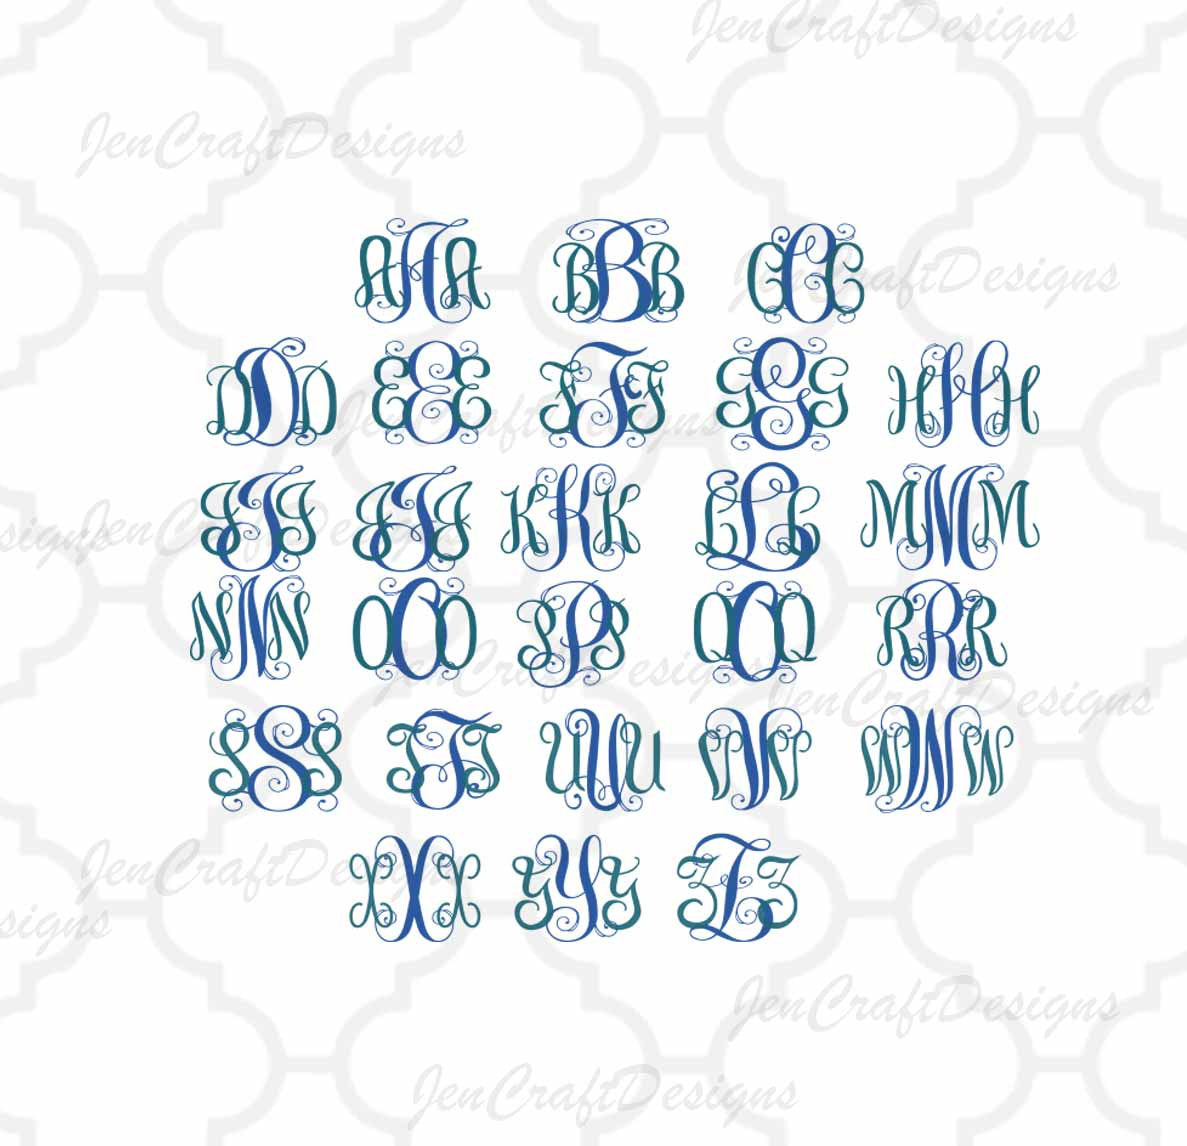 Exclusive Classy Locking Monogram AlphaBet SVG, EPS, DXF and PNG - JenCraft Designs